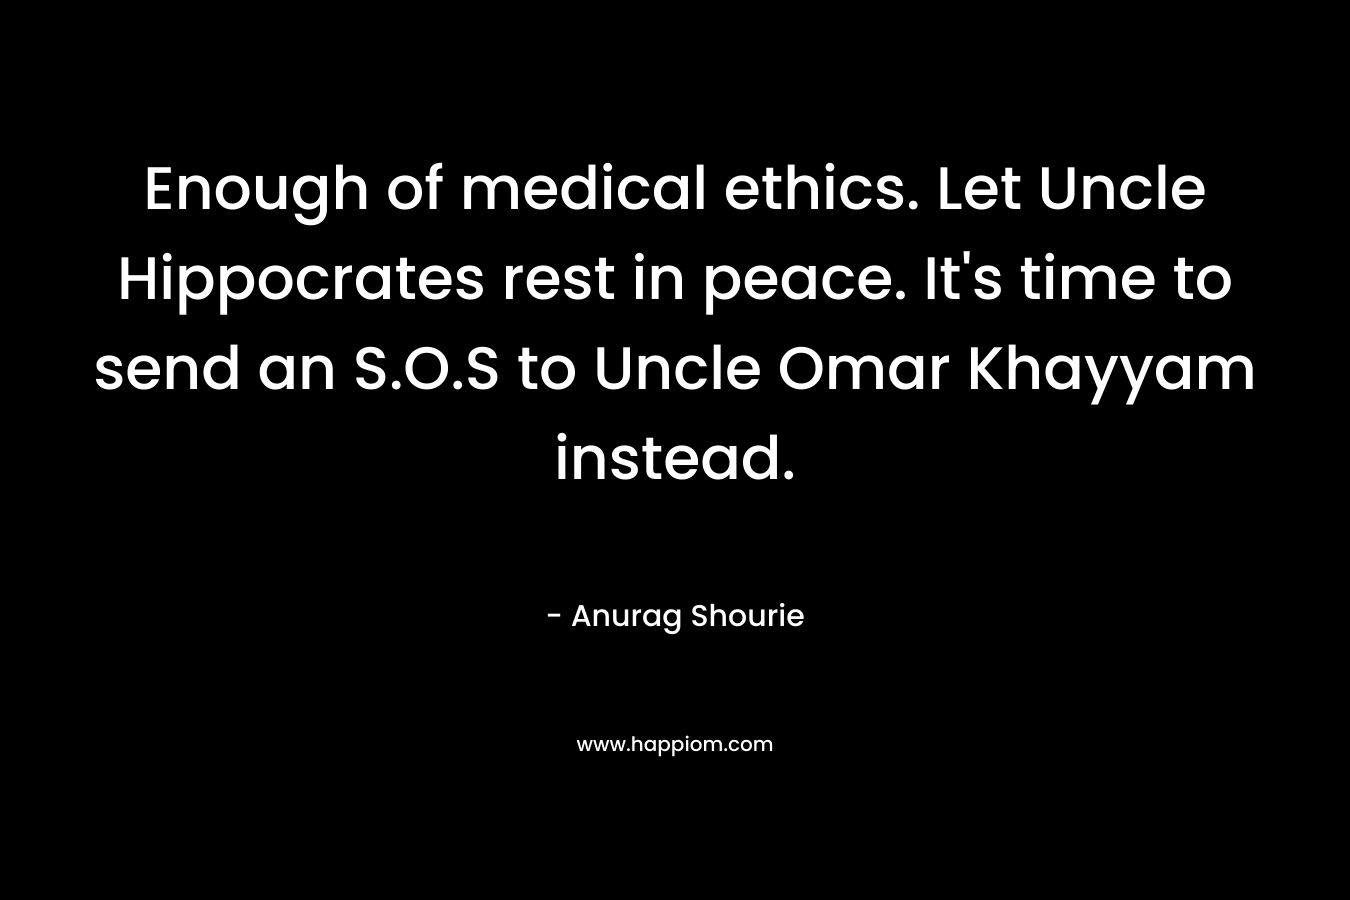 Enough of medical ethics. Let Uncle Hippocrates rest in peace. It’s time to send an S.O.S to Uncle Omar Khayyam instead. – Anurag Shourie